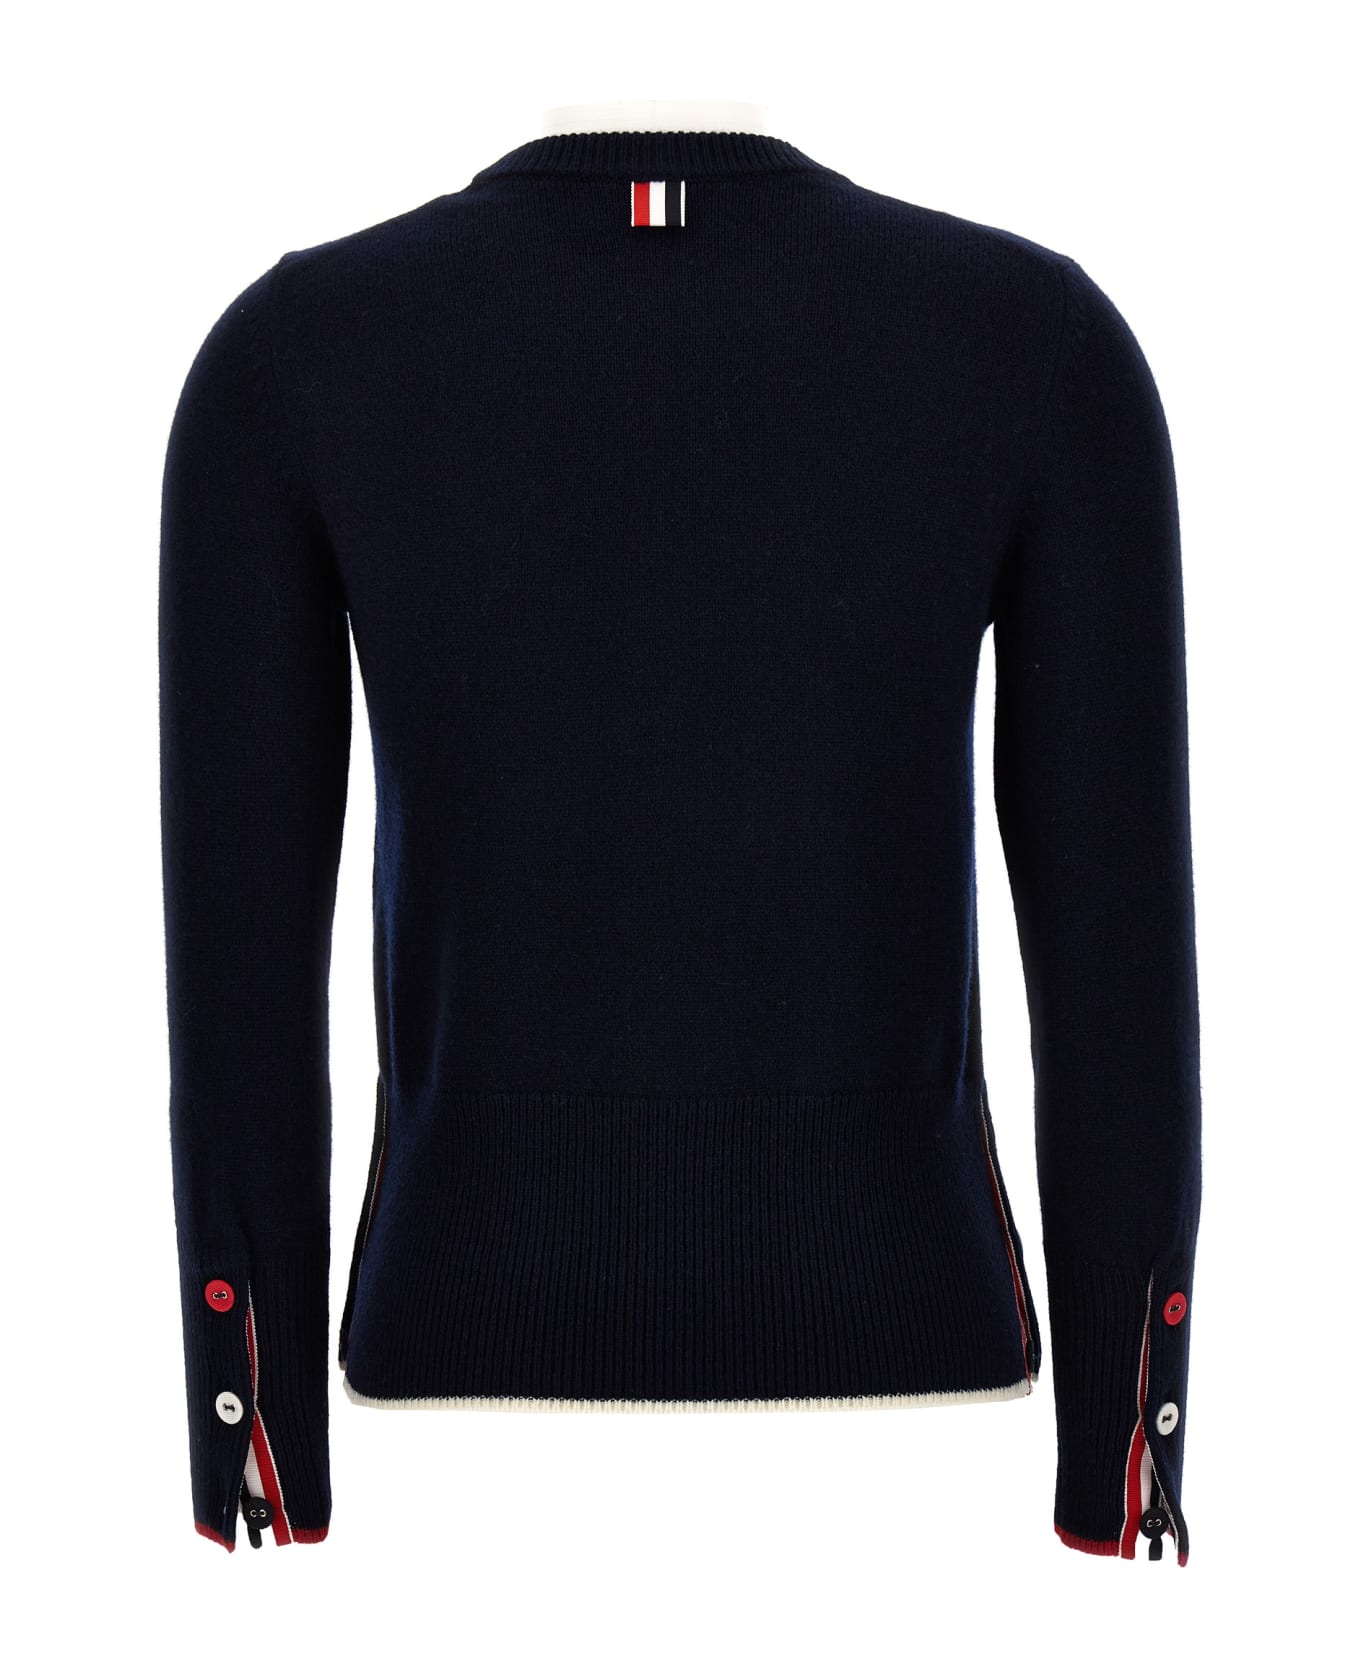 Thom Browne 'hector & Bow' Sweater - Blue ニットウェア